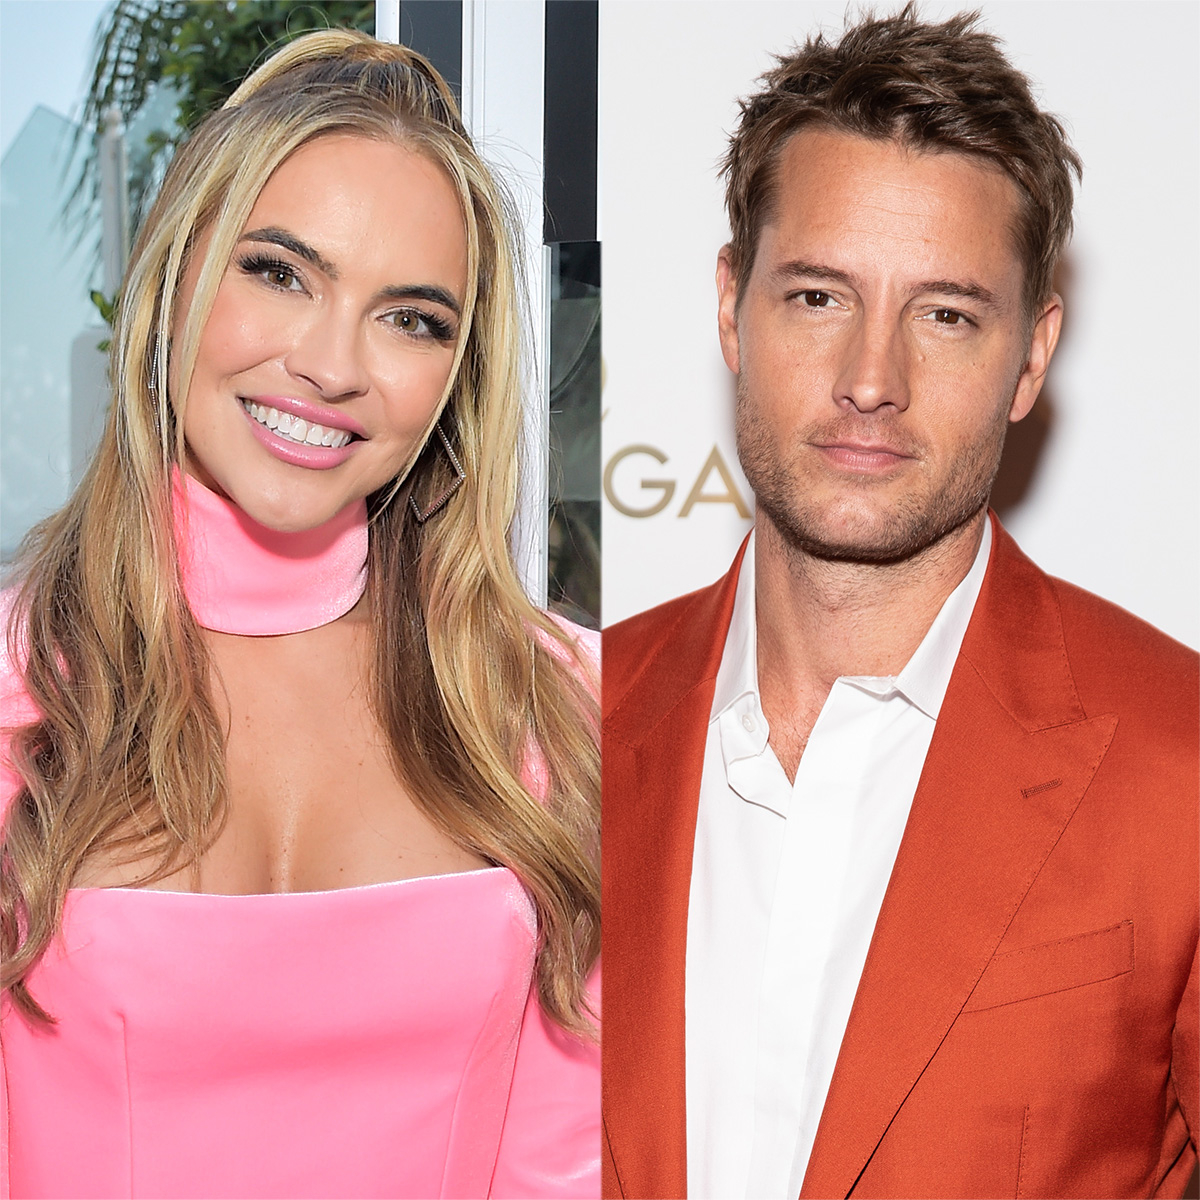 https://akns-images.eonline.com/eol_images/Entire_Site/20211024/rs_1200x1200-211124113856-1200.chrishell-stause-justin-hartley.jpg?fit=around%7C1200:1200&output-quality=90&crop=1200:1200;center,top